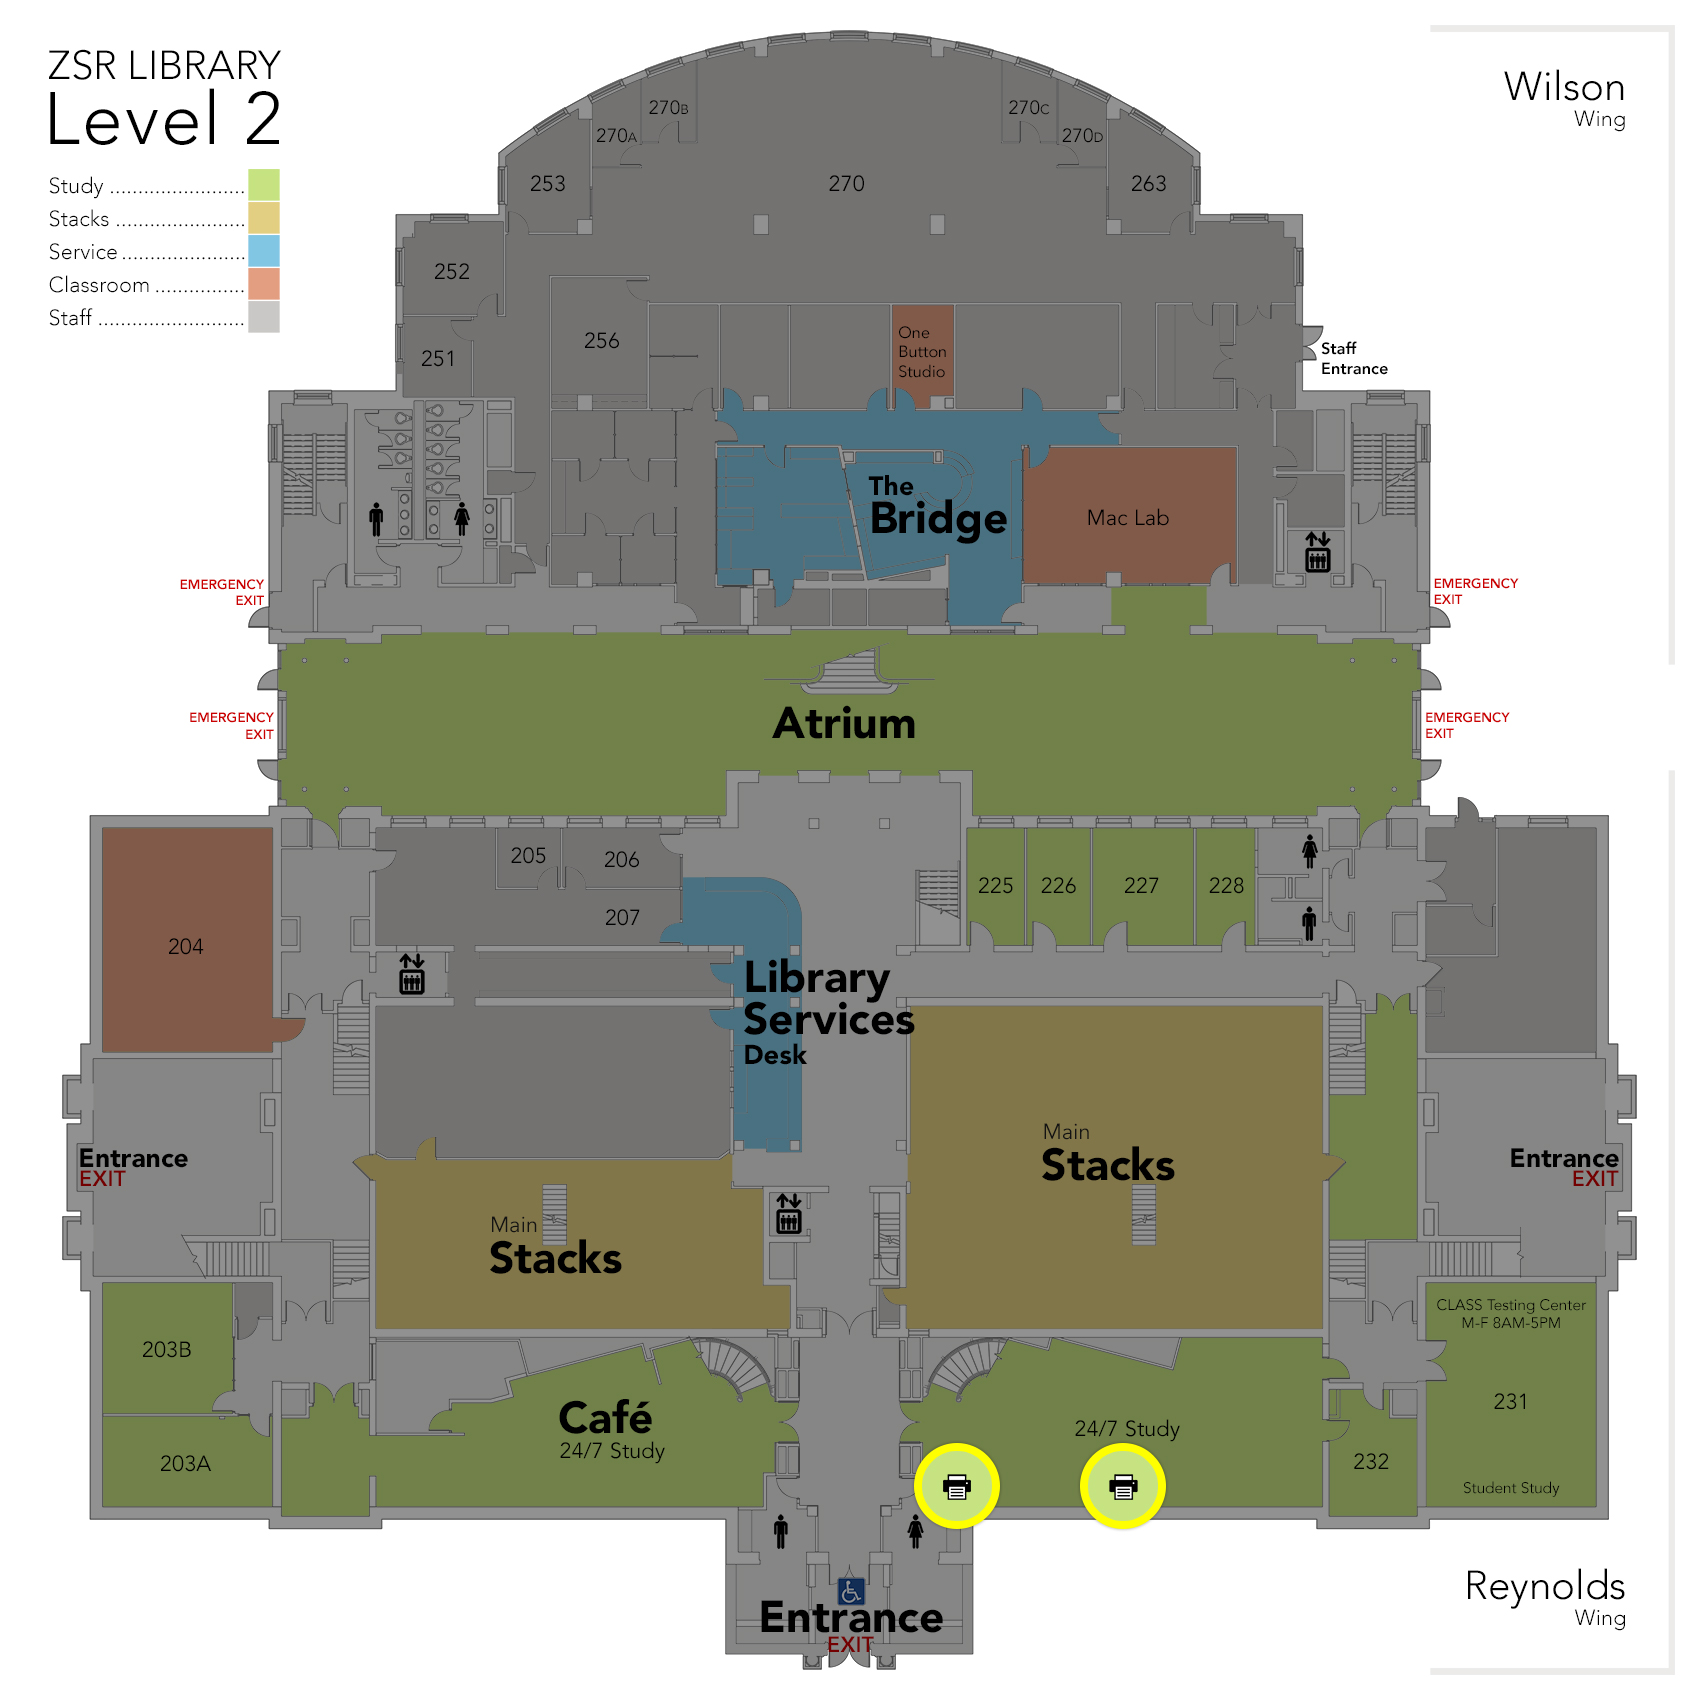 Locations of printers on Level 2